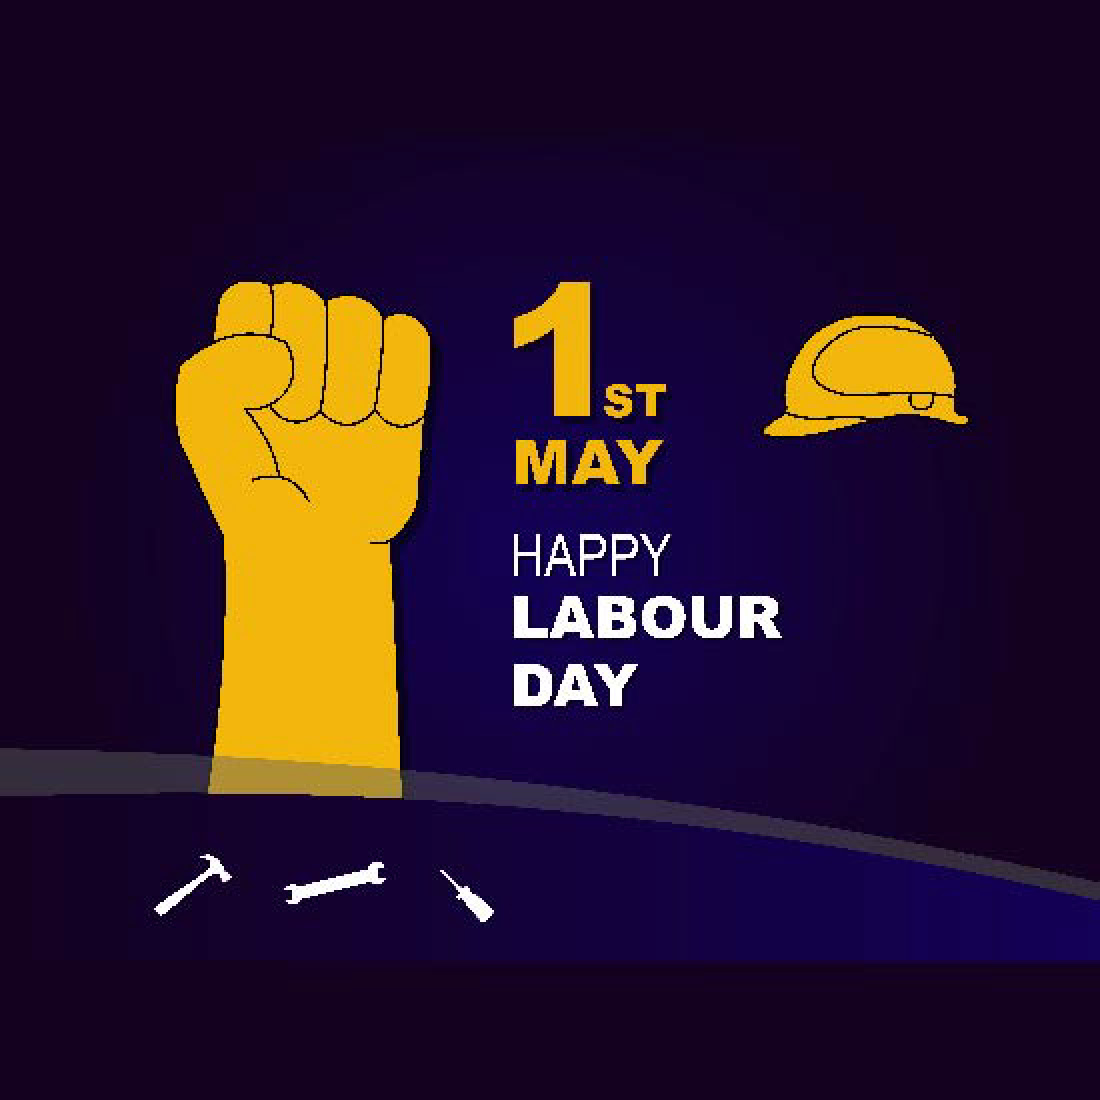 Happy International Labour day happy international workers day labor day and may day celebration design 1st May vector illustration 4000x3000px preview image.